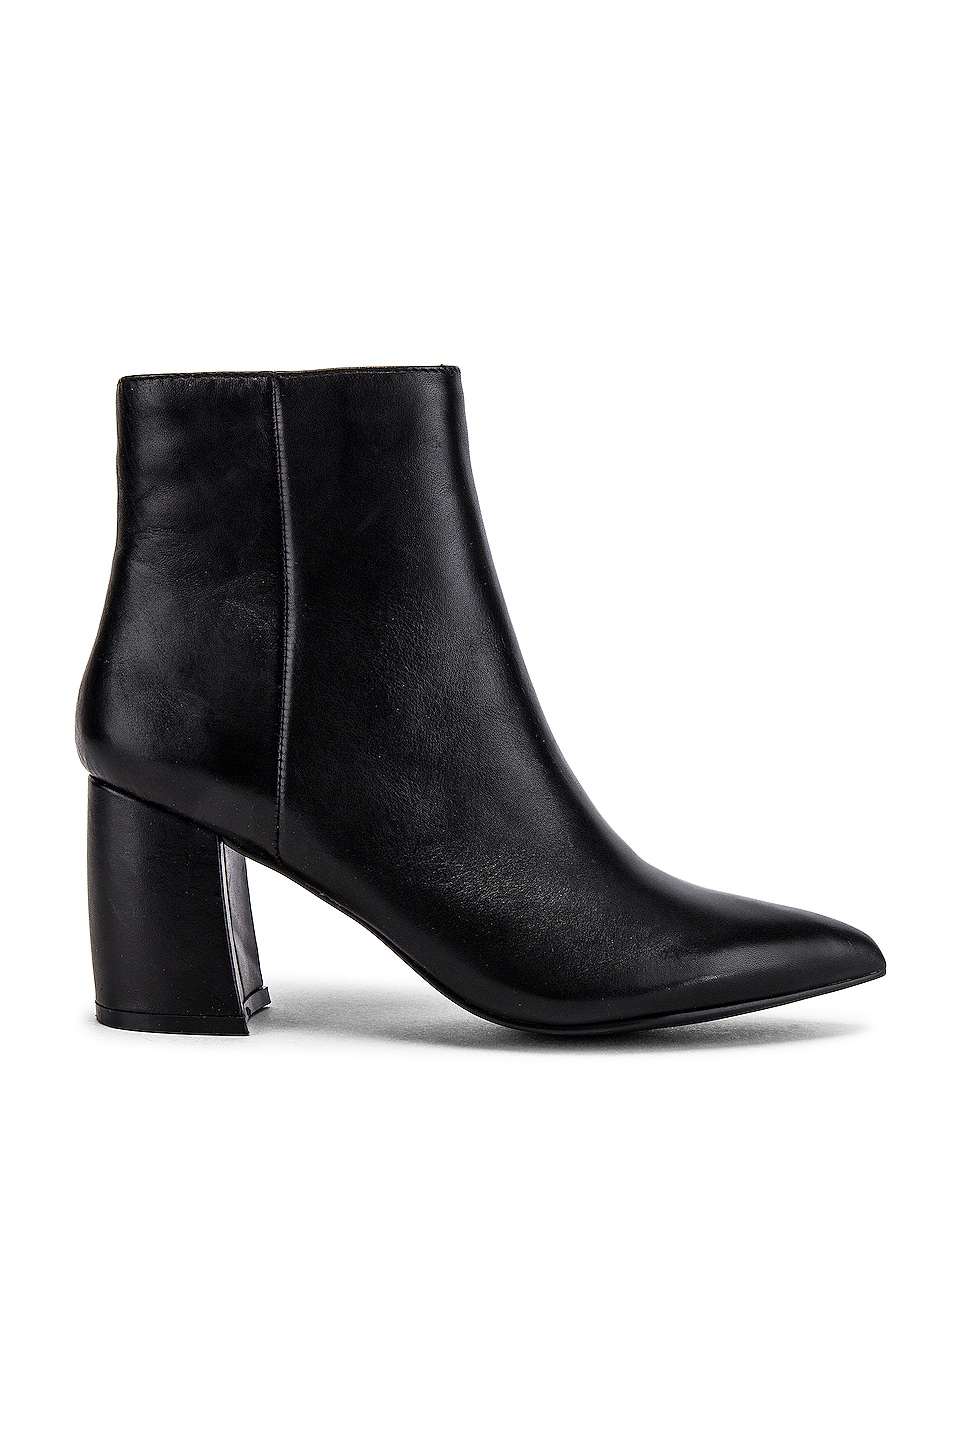 steve madden alexis leather booties